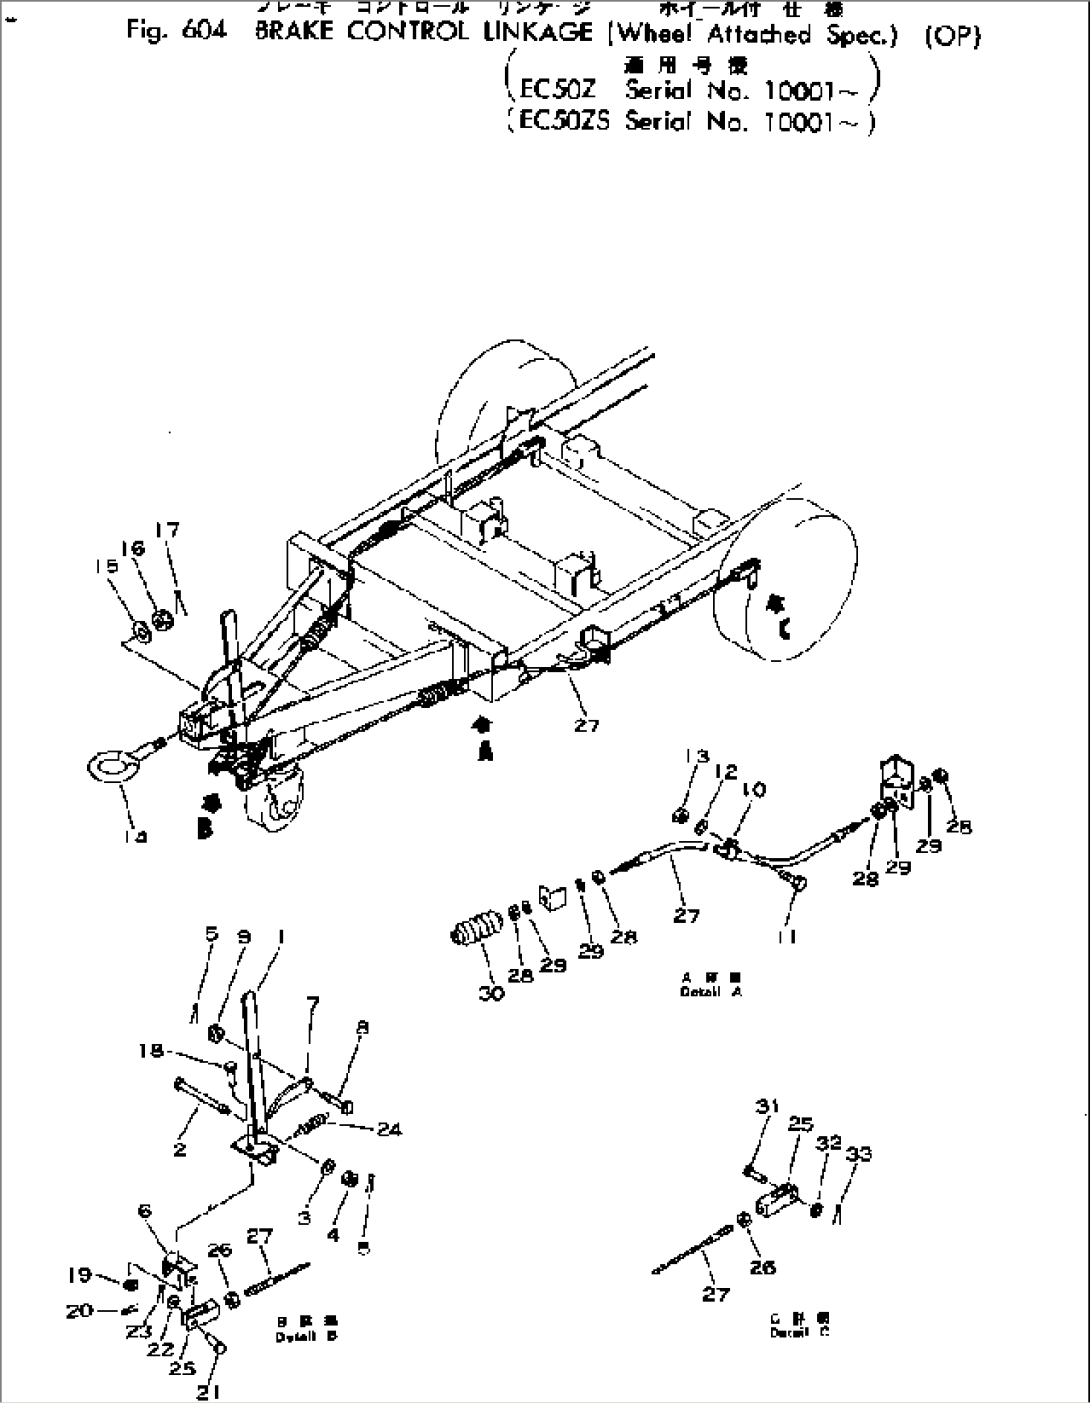 BRAKE CONTROL LINKAGE (WHEEL ATTACHED SPEC.)